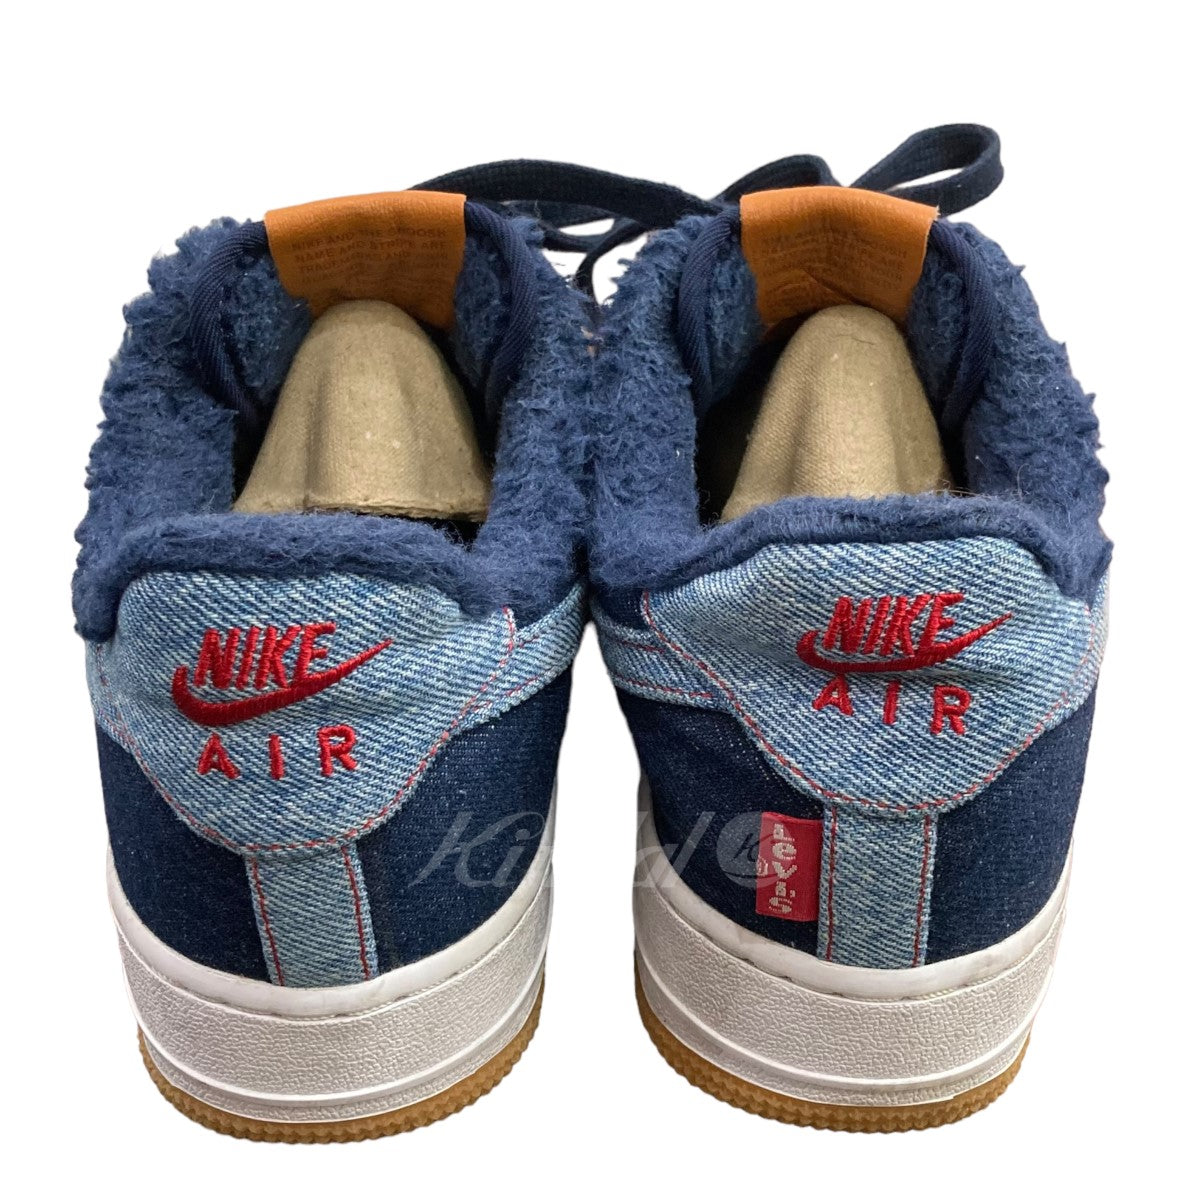 Levis×NIKE BY YOU(リーバイス×ナイキバイユー) 「AIR FORCE 1 BY YOU」 デニムエアフォース1スニーカー